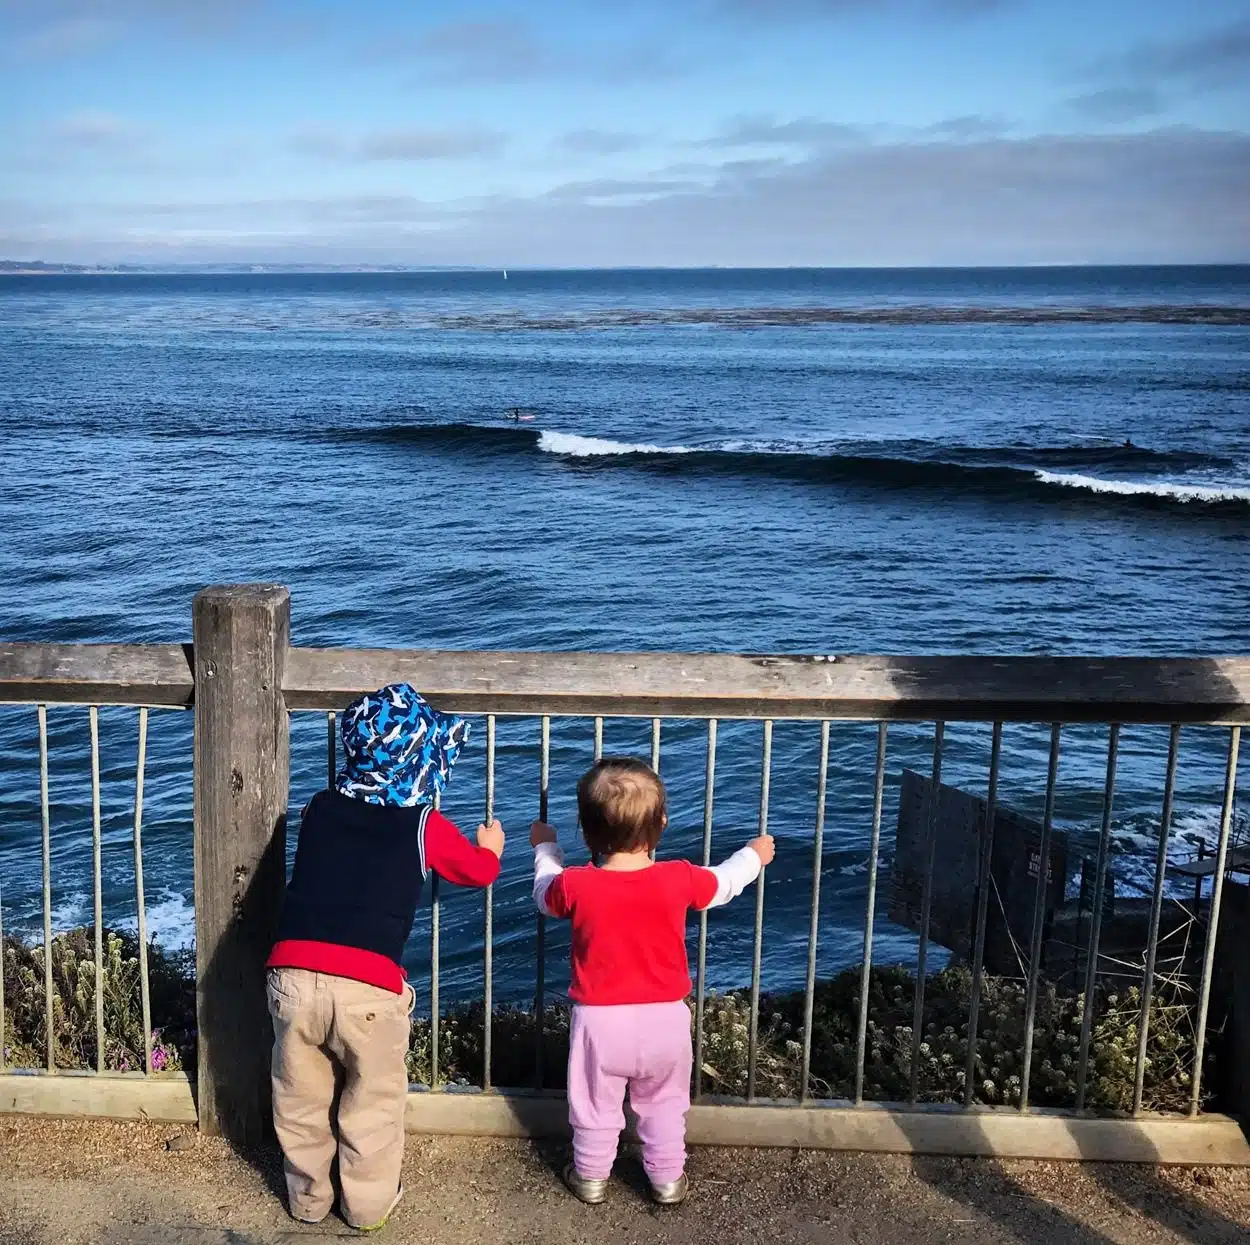 Our little ones yelling at the waves in Santa Cruz, California.